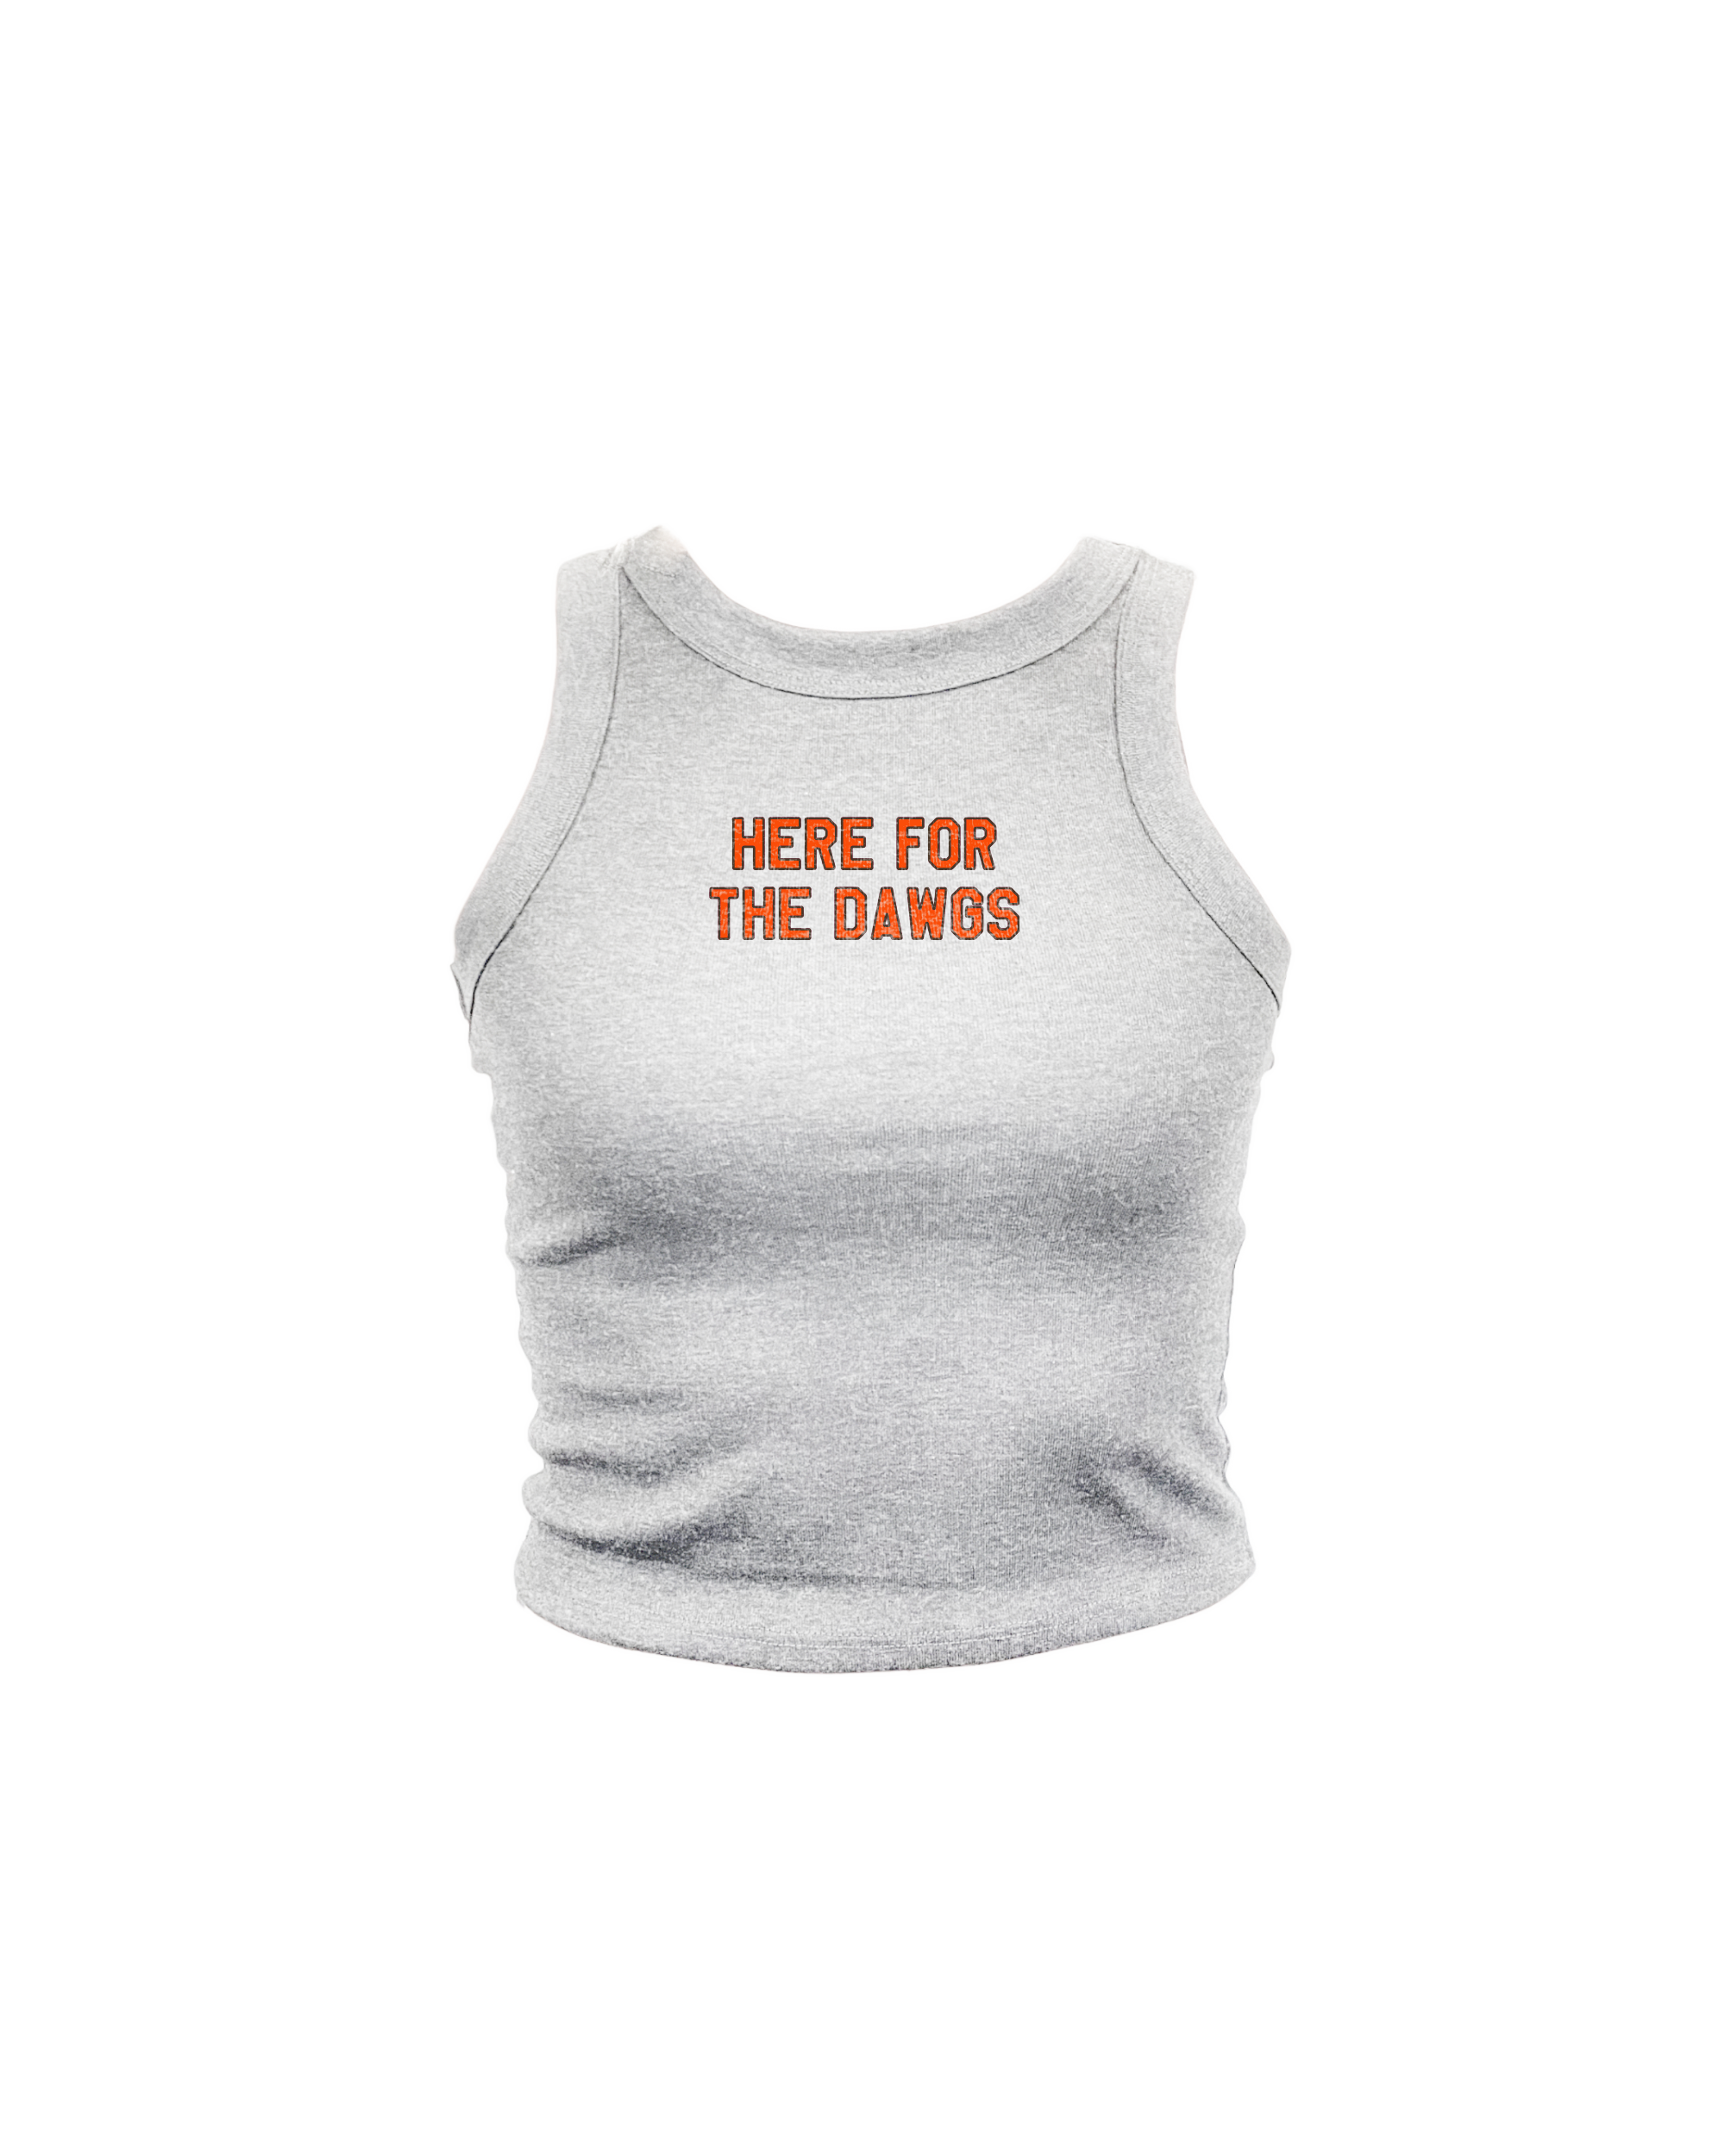 Here For The Dawgs Ash Crop Tank